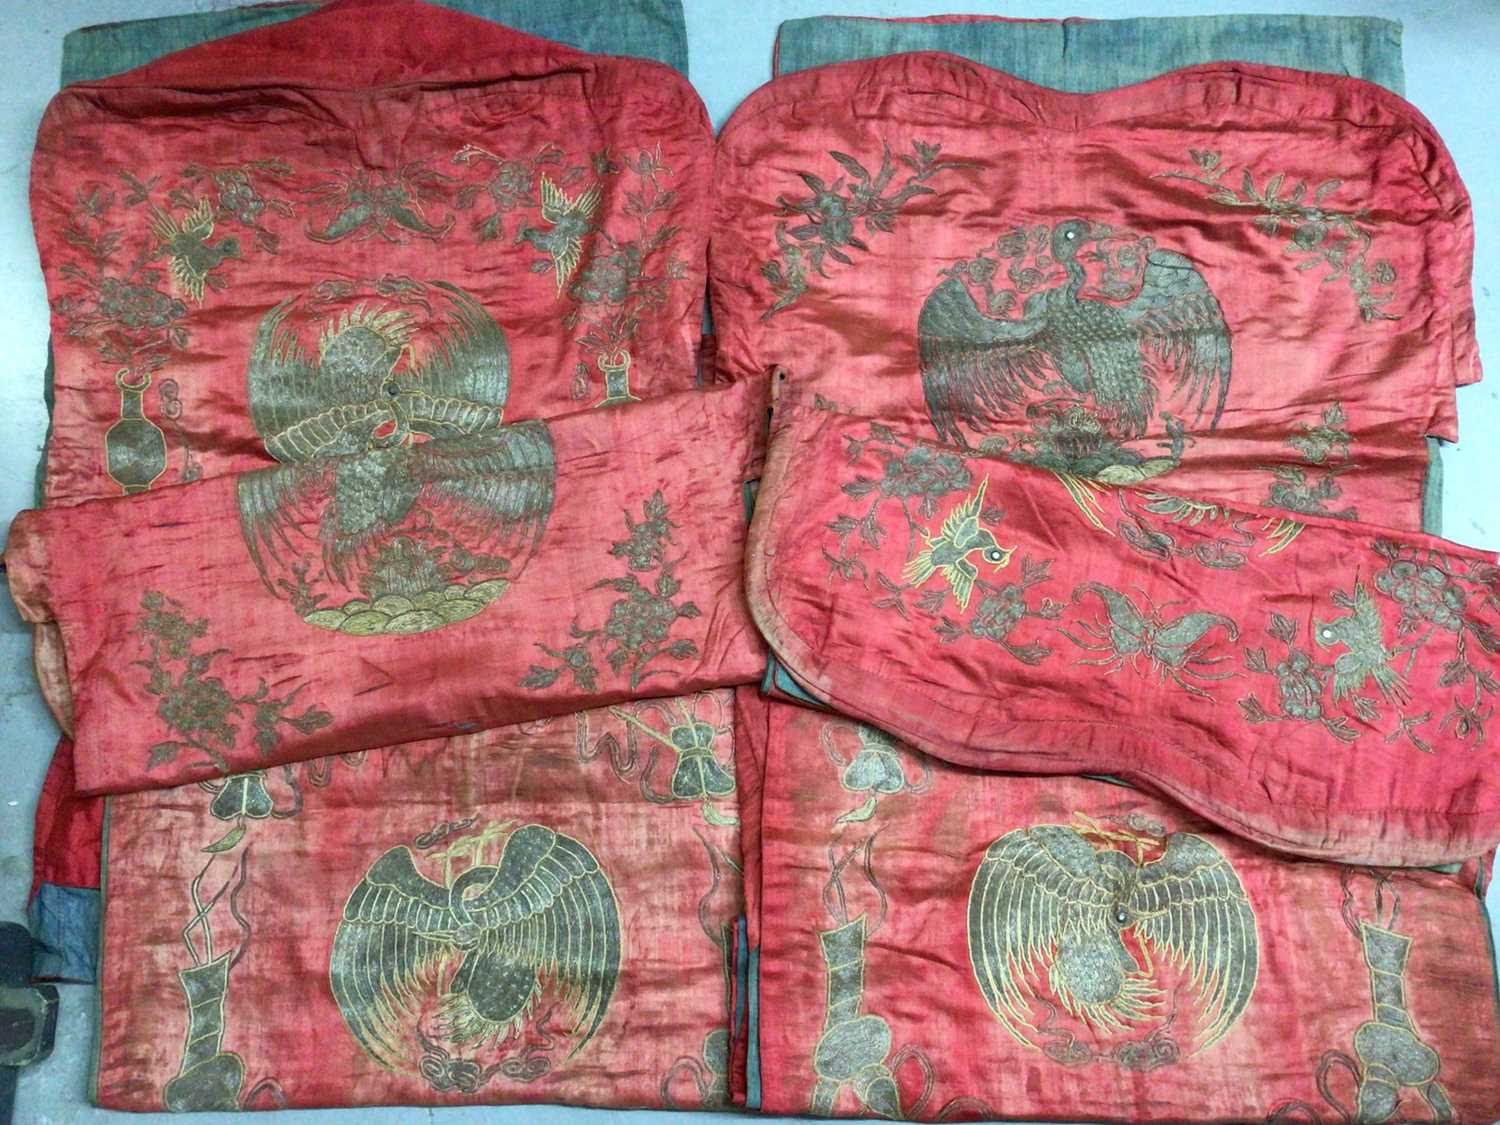 Unusual set of six Chinese embroidered chair covers, probably 19th century - Image 4 of 4